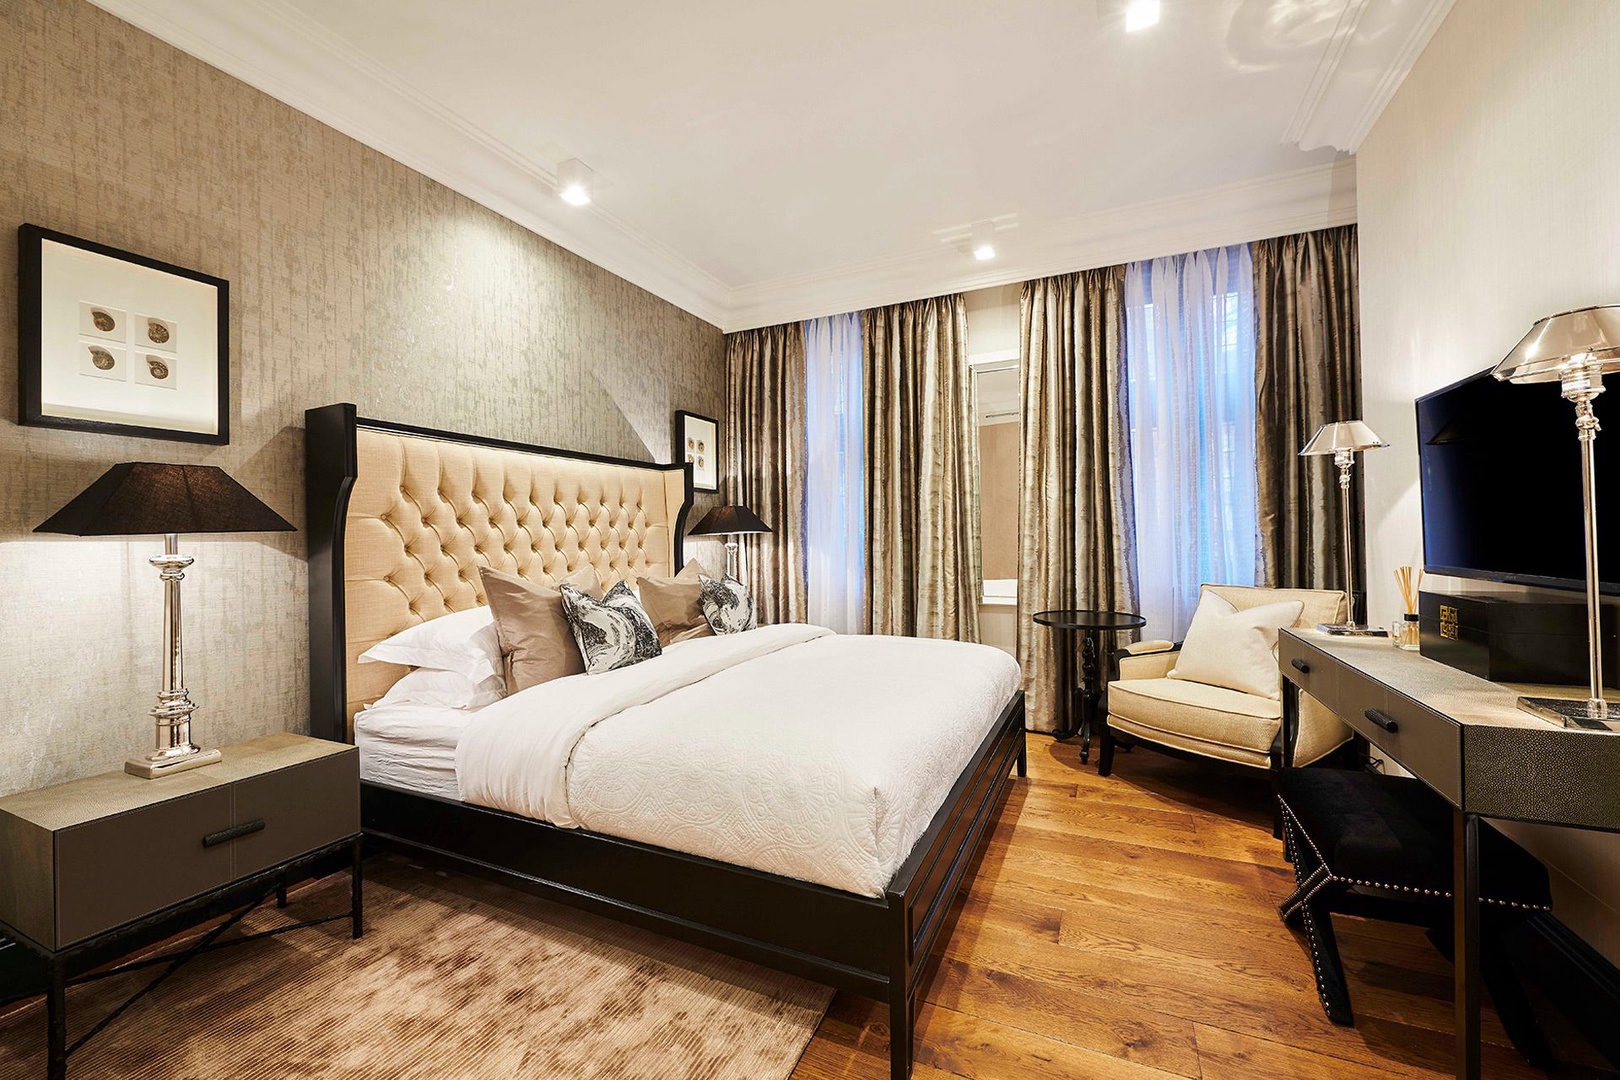 Sumptuous first bedroom with designer furnishings